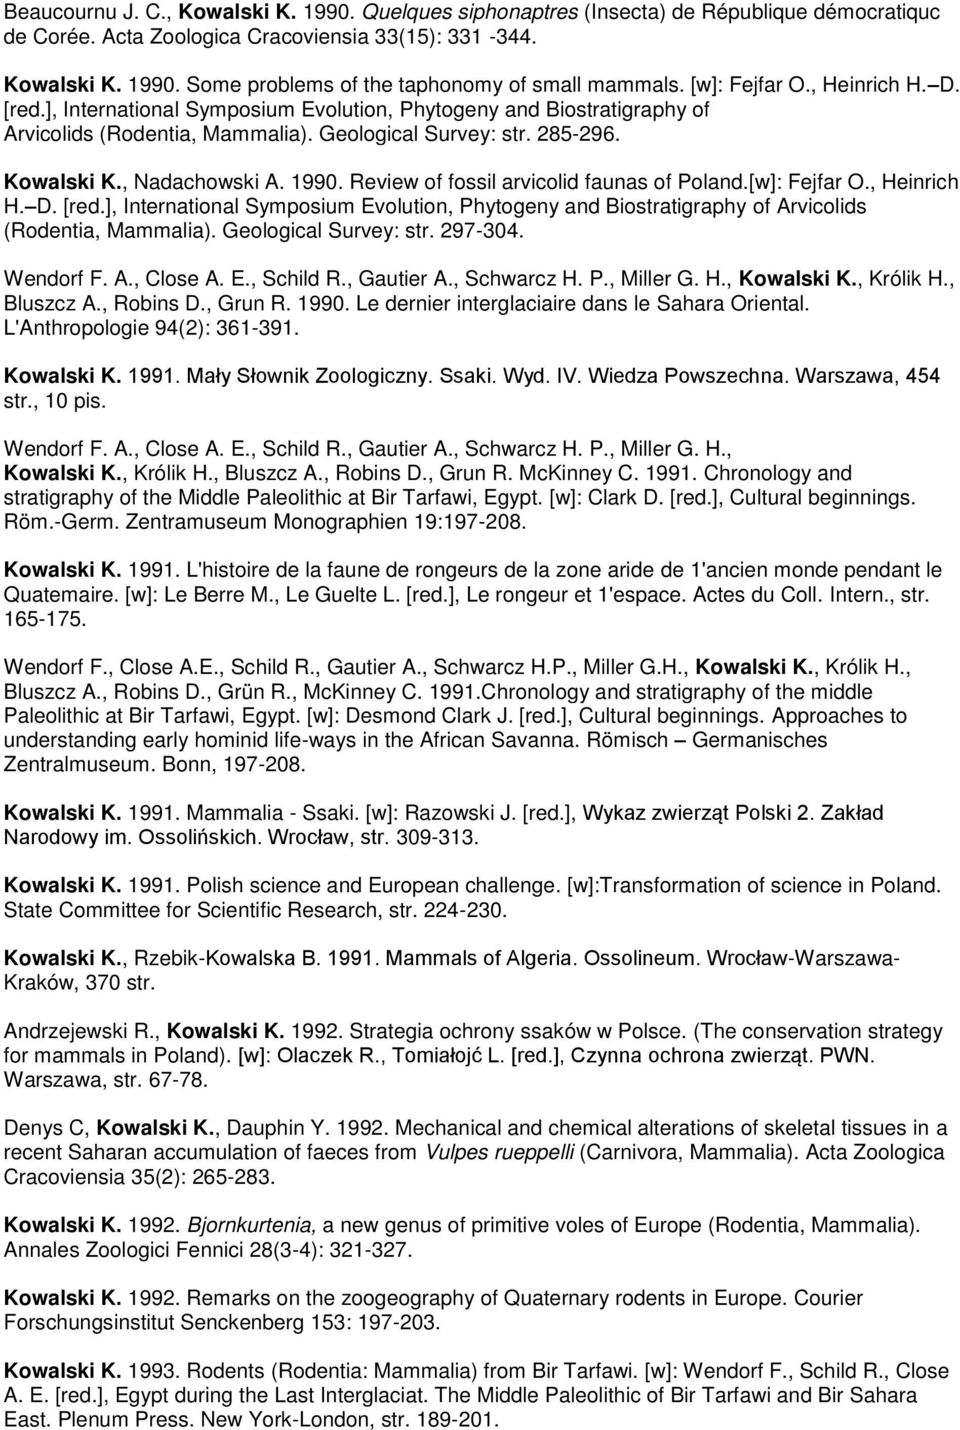 1990. Review of fossil arvicolid faunas of Poland.[w]: Fejfar O., Heinrich H. D. [red.], International Symposium Evolution, Phytogeny and Biostratigraphy of Arvicolids (Rodentia, Mammalia).